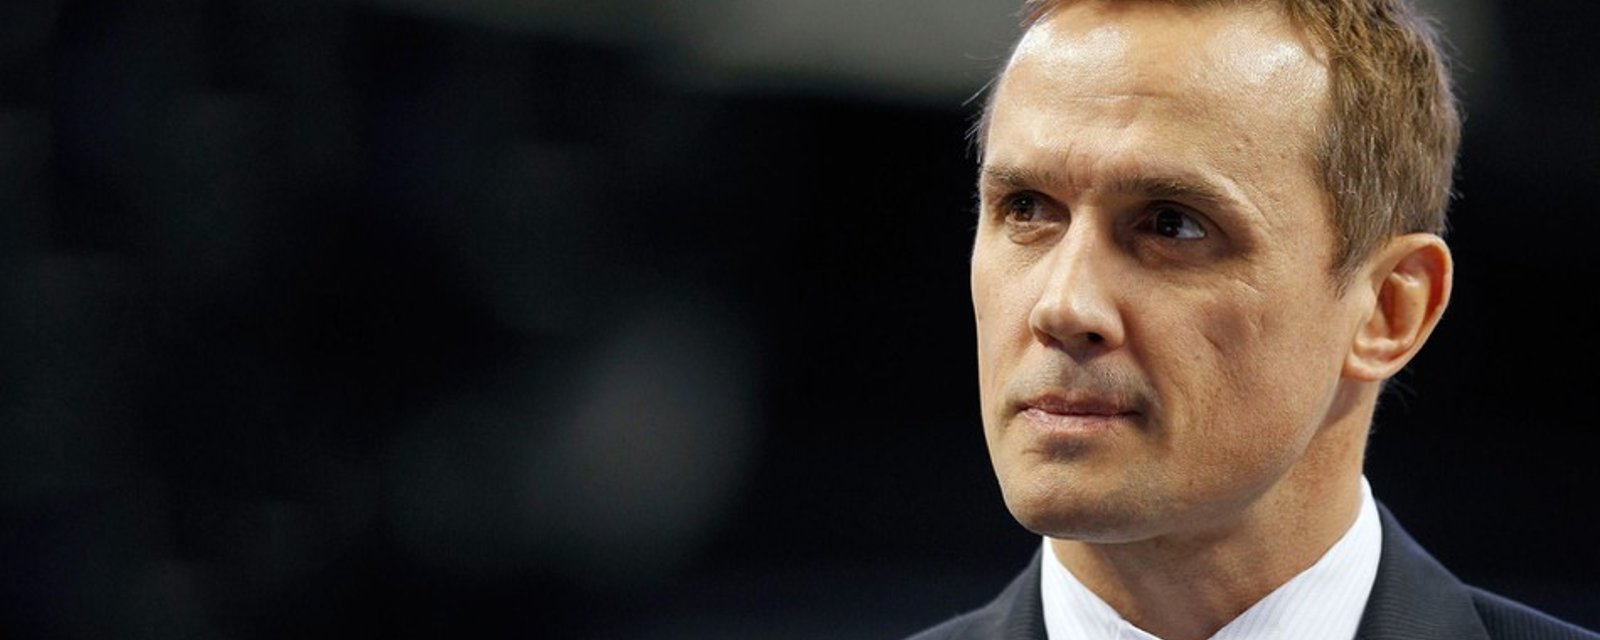 New report indicates Yzerman set to join Red Wings organization?